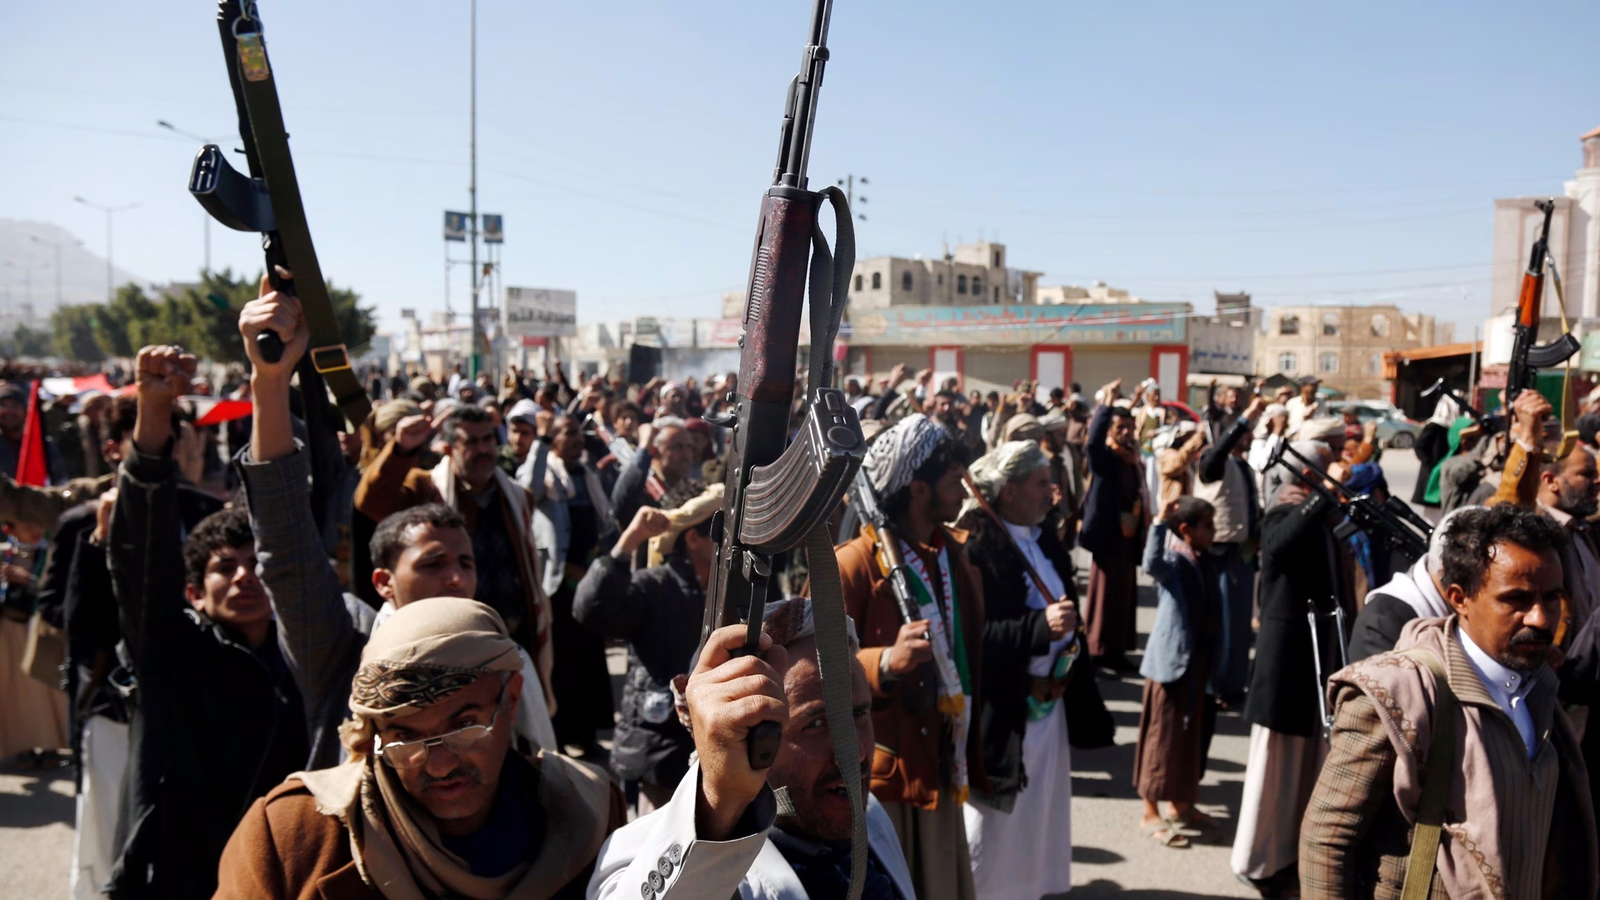 Yemen conflict deepens as Houthi actions align with Gaza (Credits: ABC7)